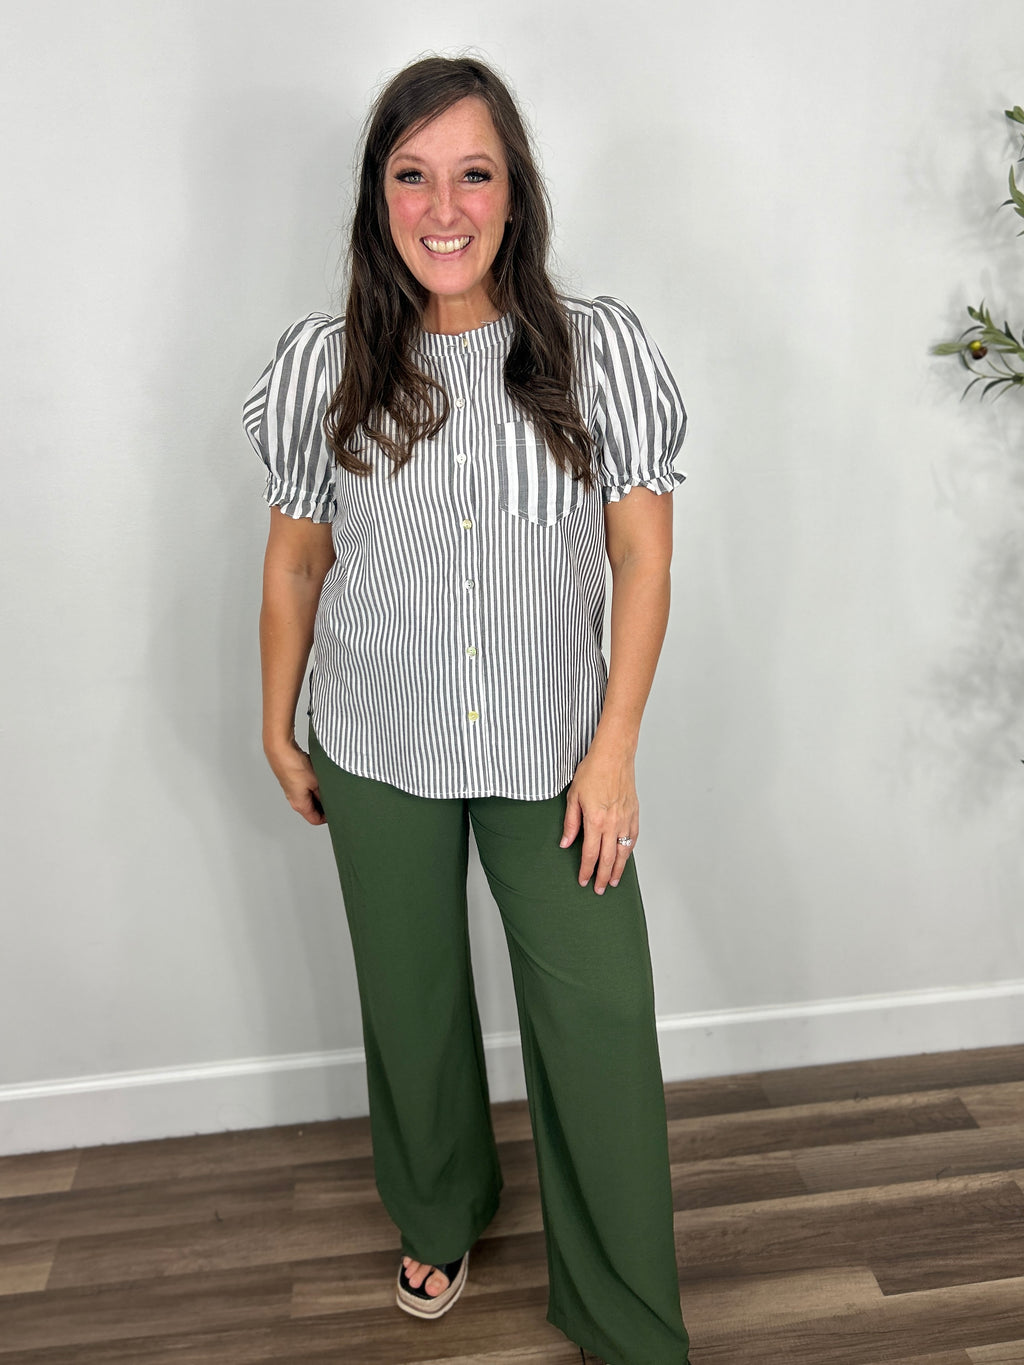 Women's Mila striped button down top paired with green straight leg pants with black wedge sandals.